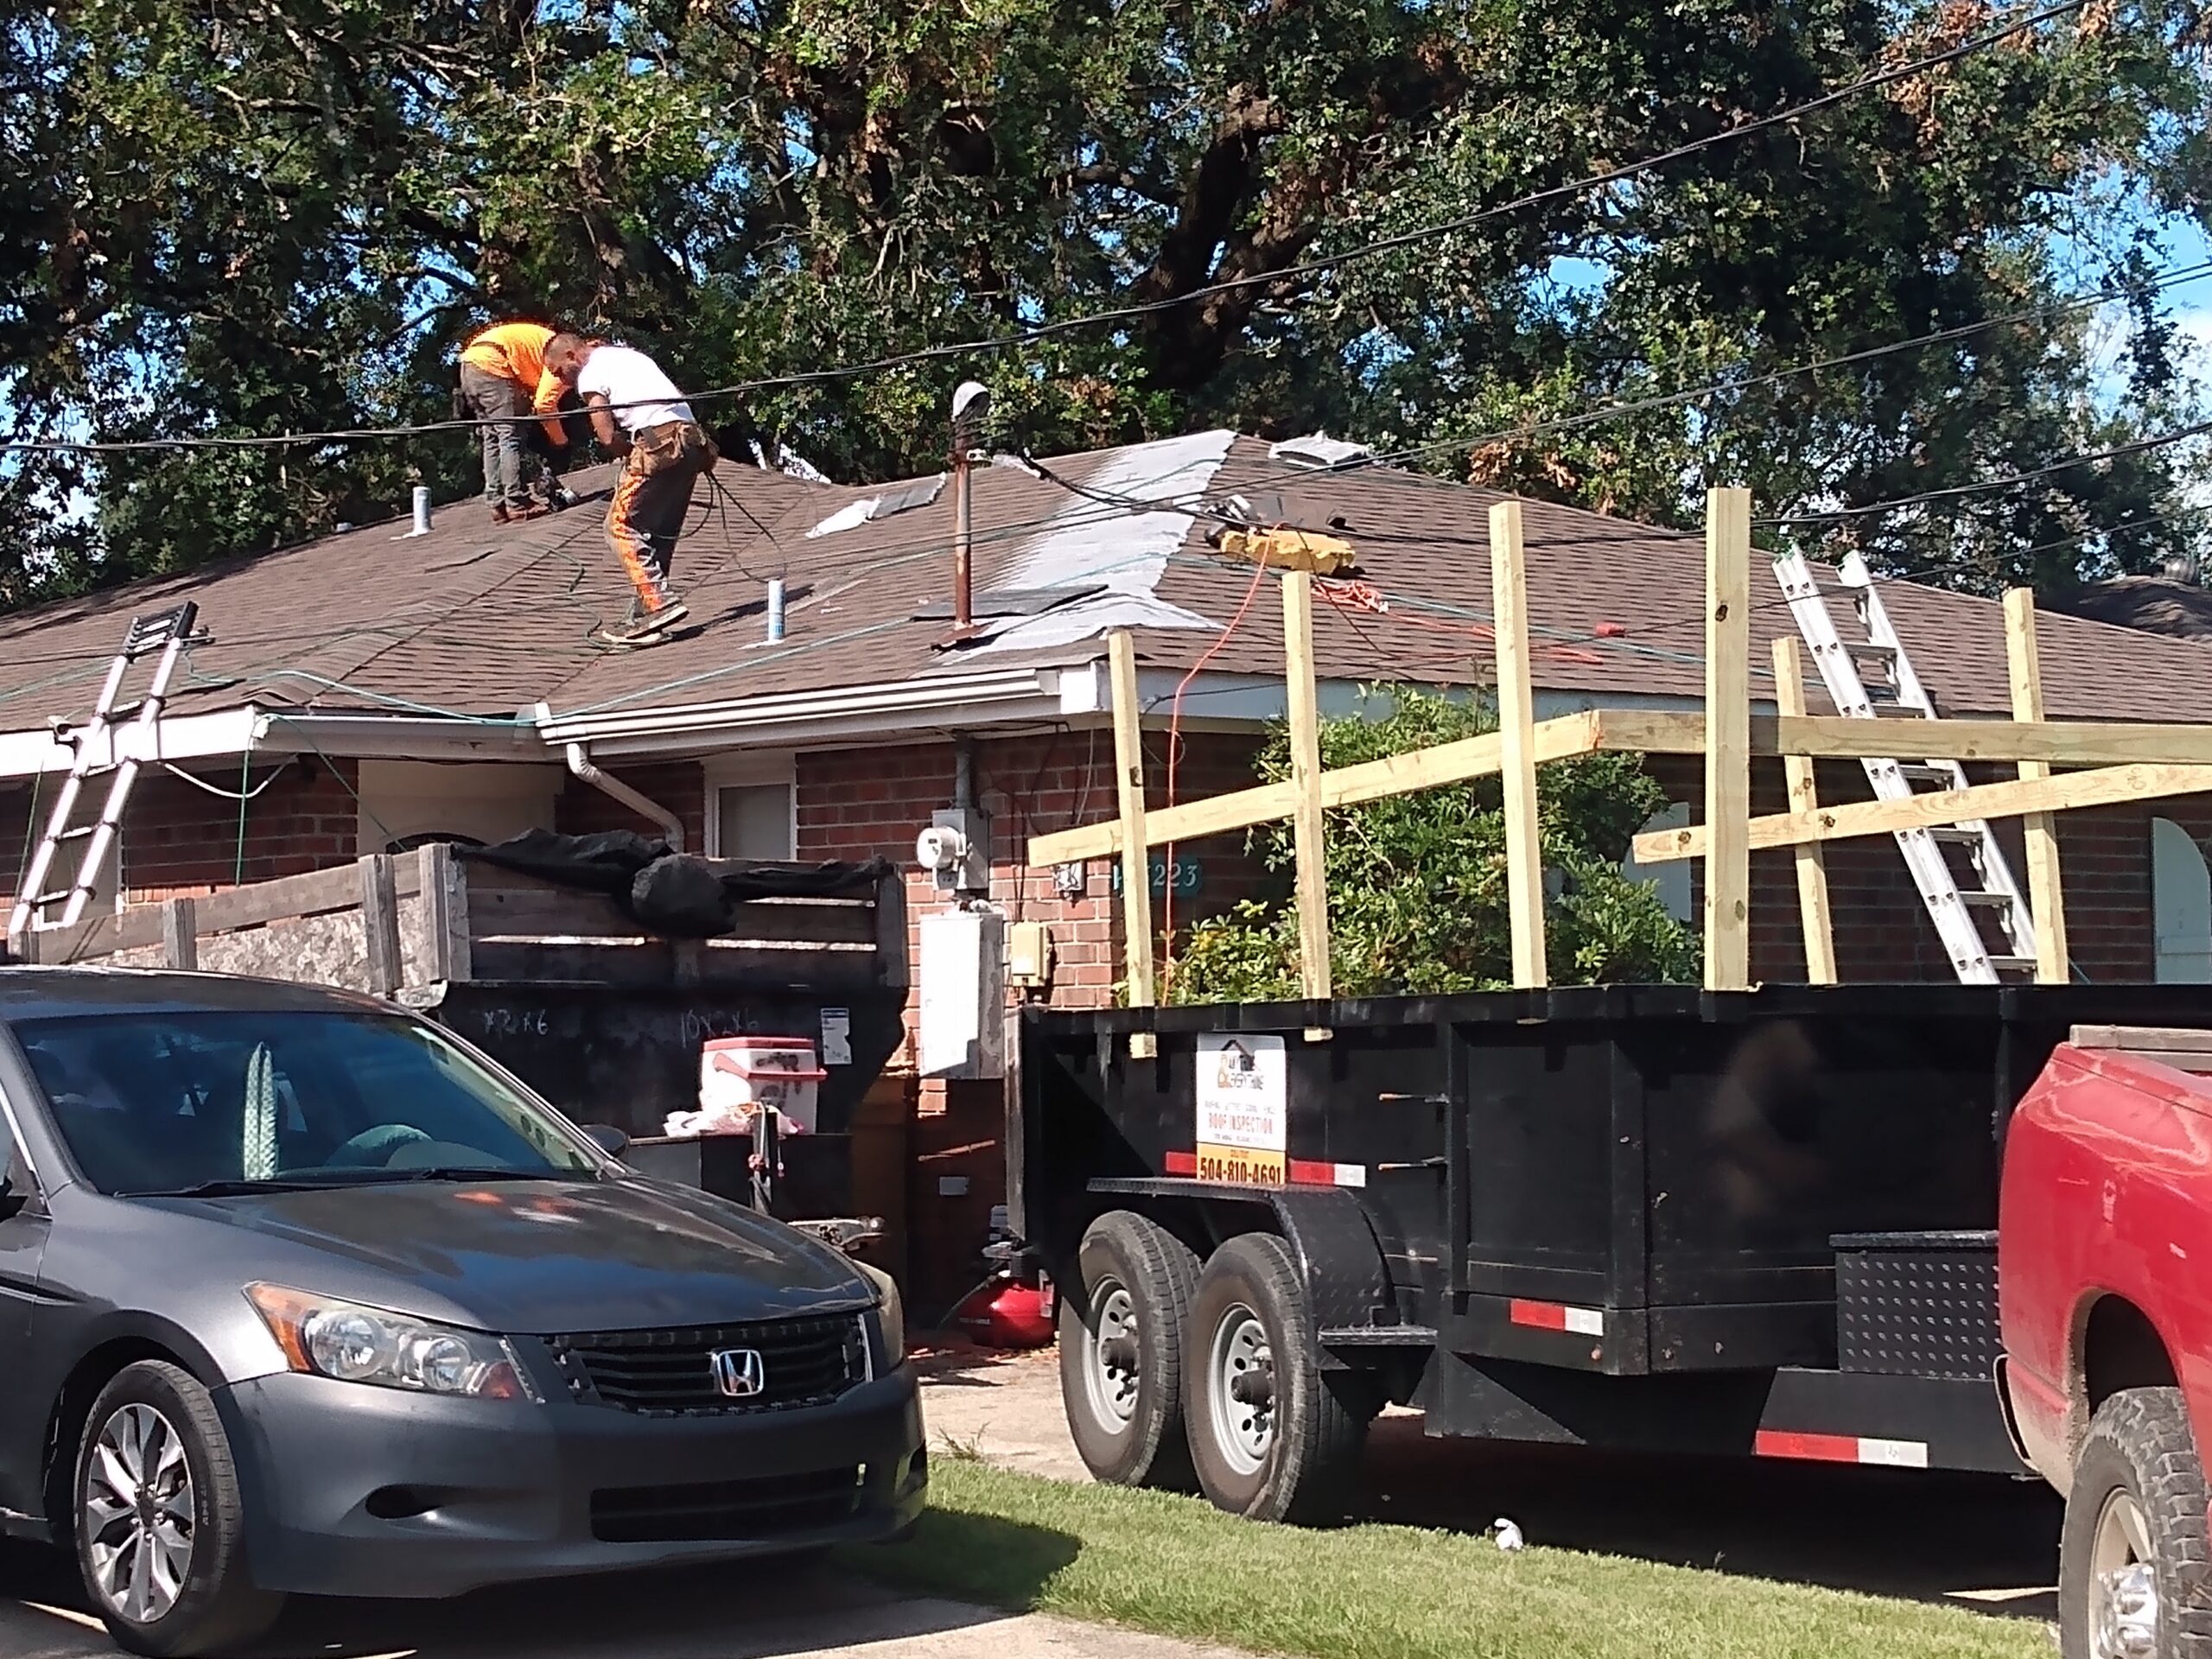 roof repairs in new orleans